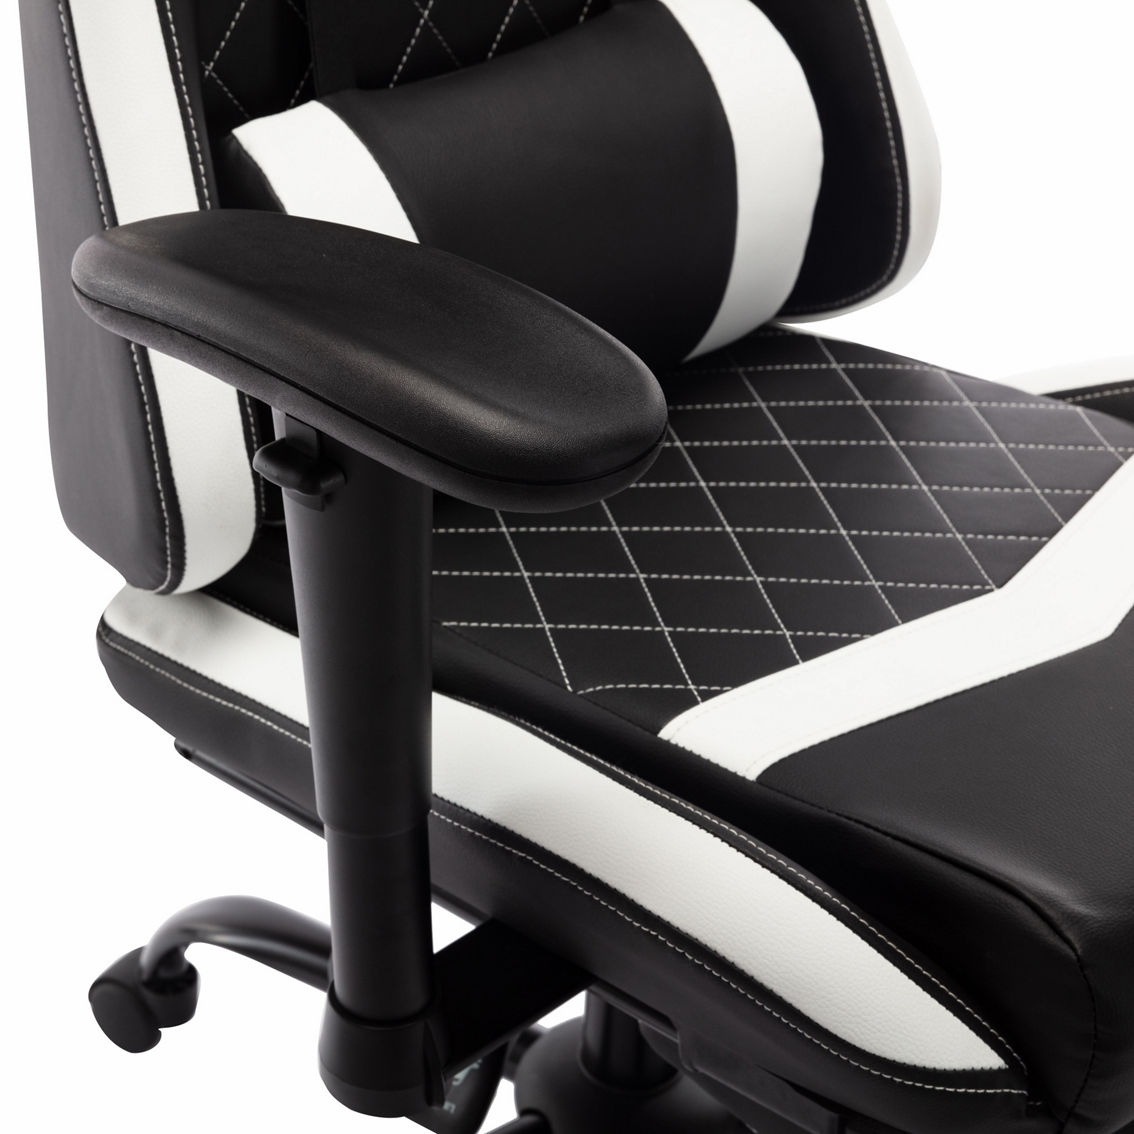 Furniture of America Nosse White Adjustable Gaming Chair - Image 2 of 3